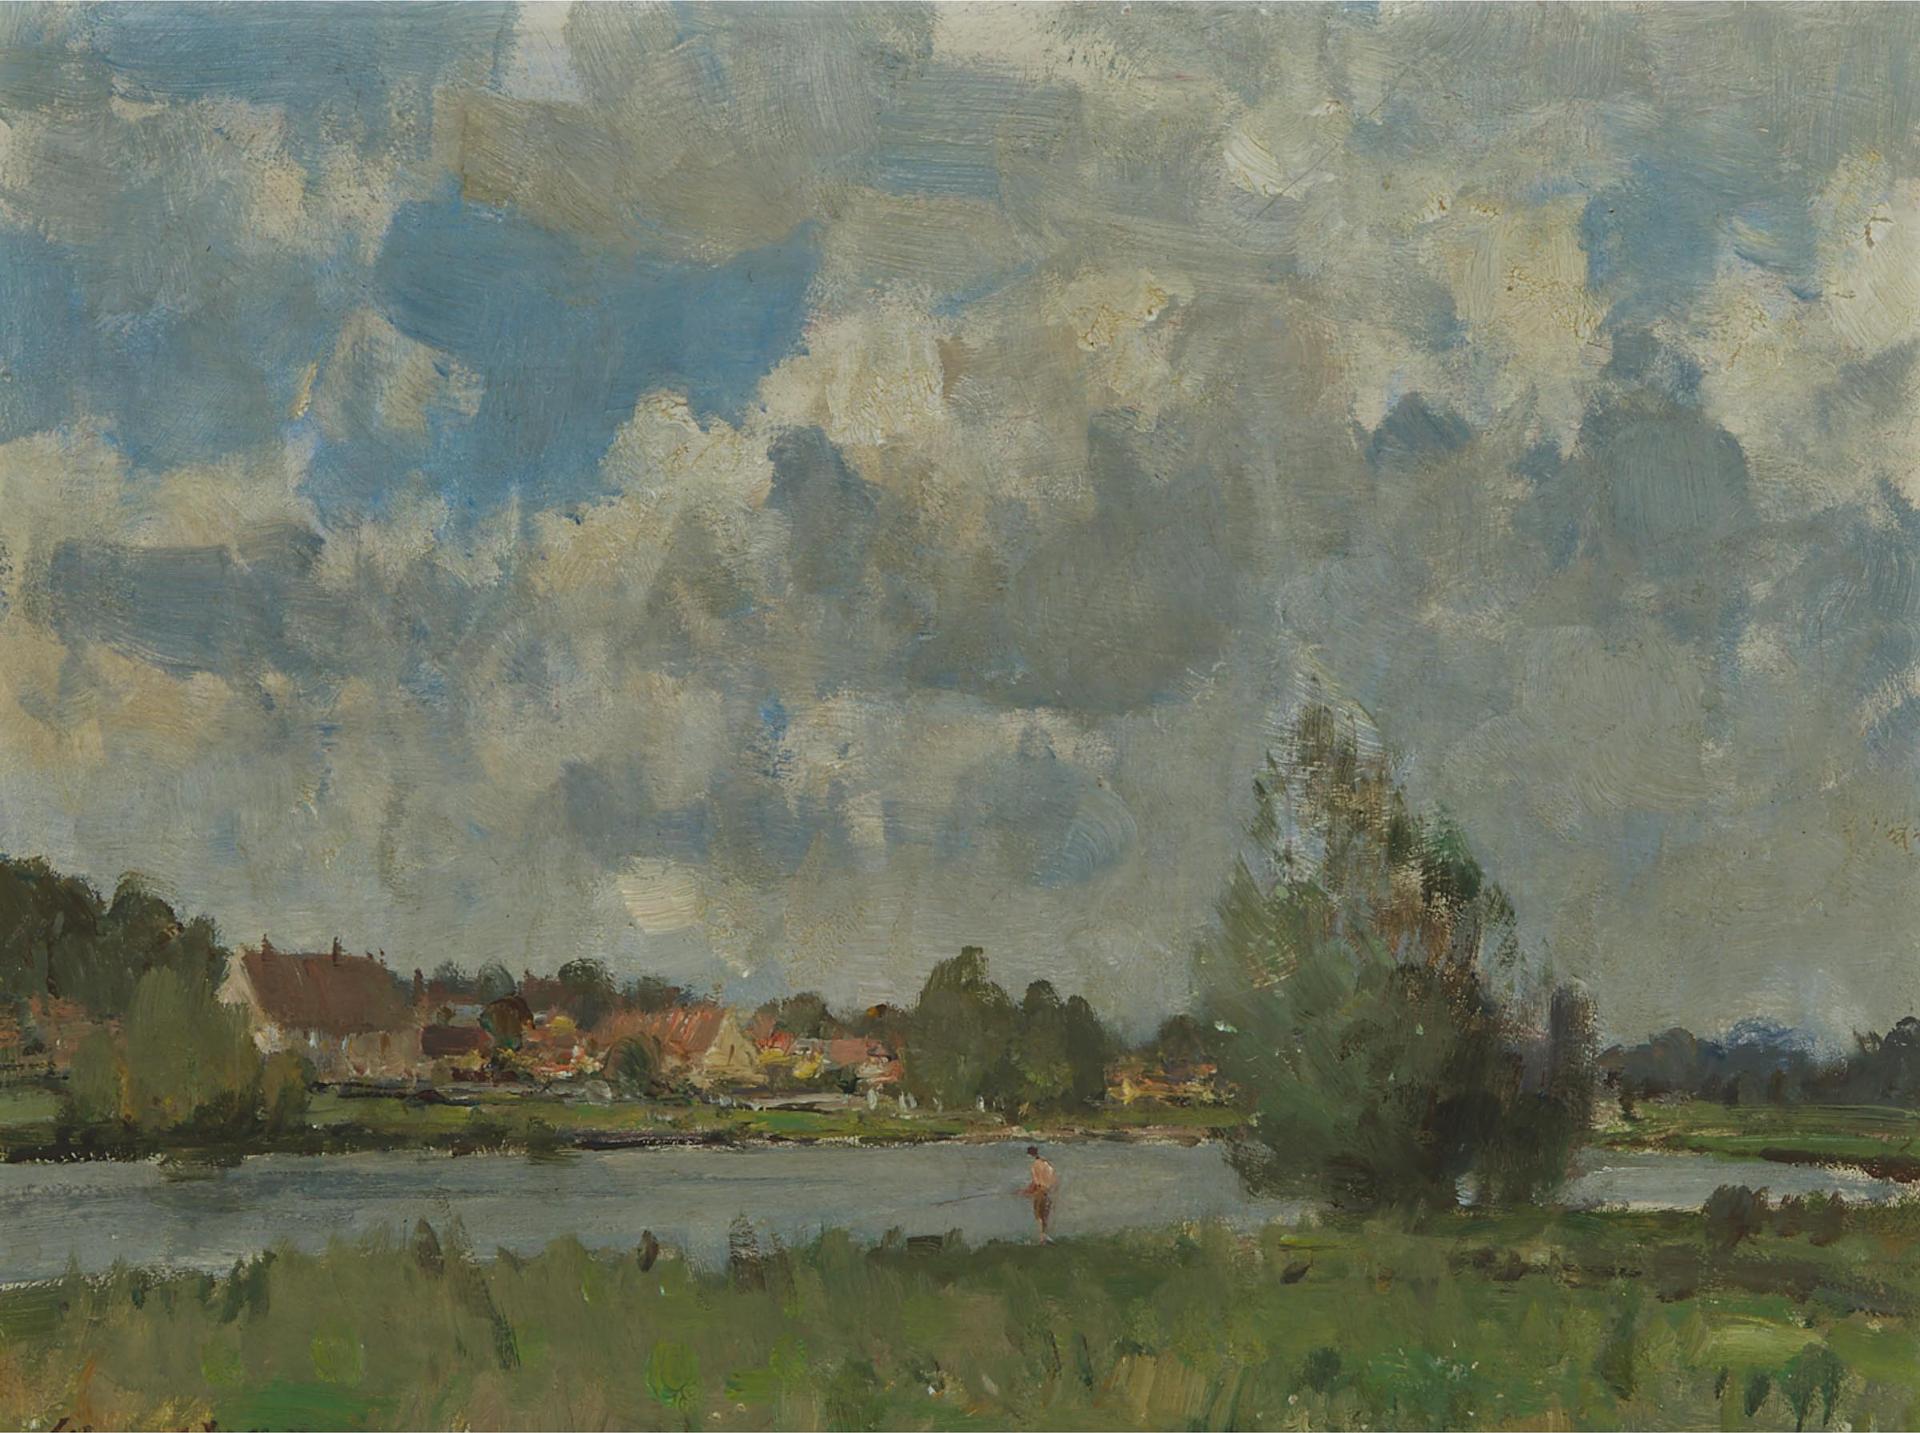 Edward Brian Seago (1910-1974) - Man Fishing At The River With Village Houses On Opposite Shore